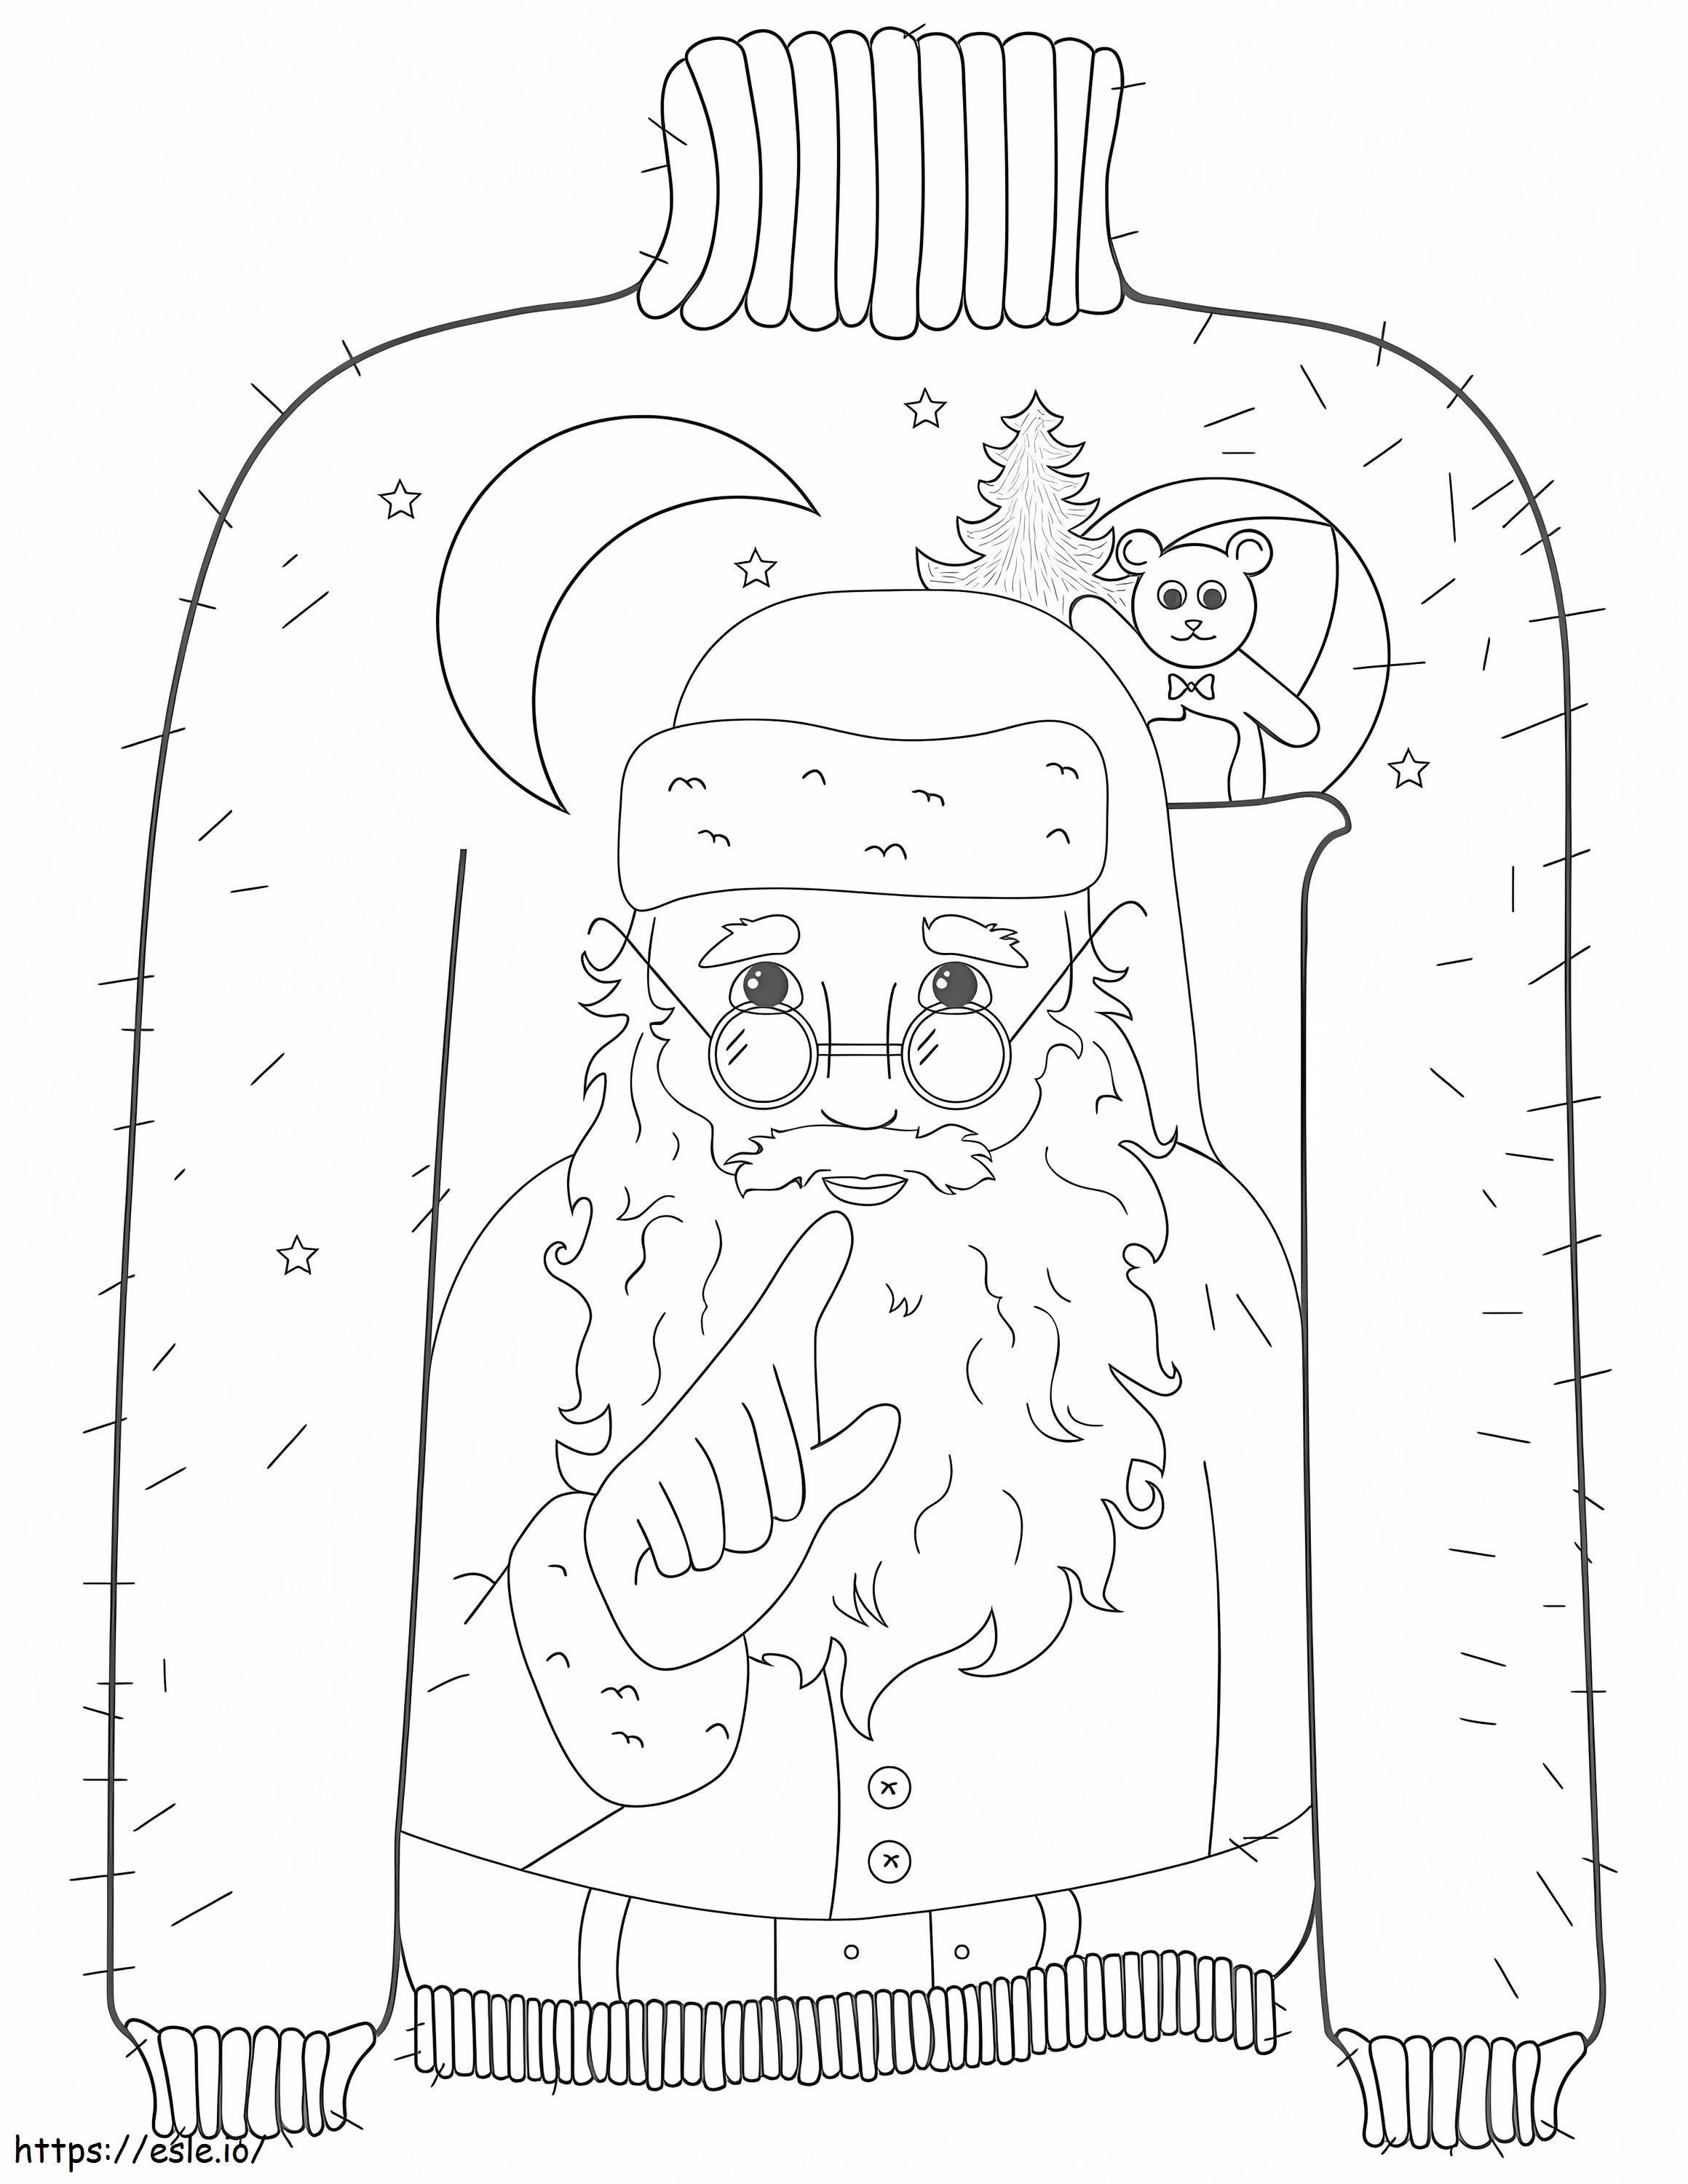 Free Christmas Sweater coloring page